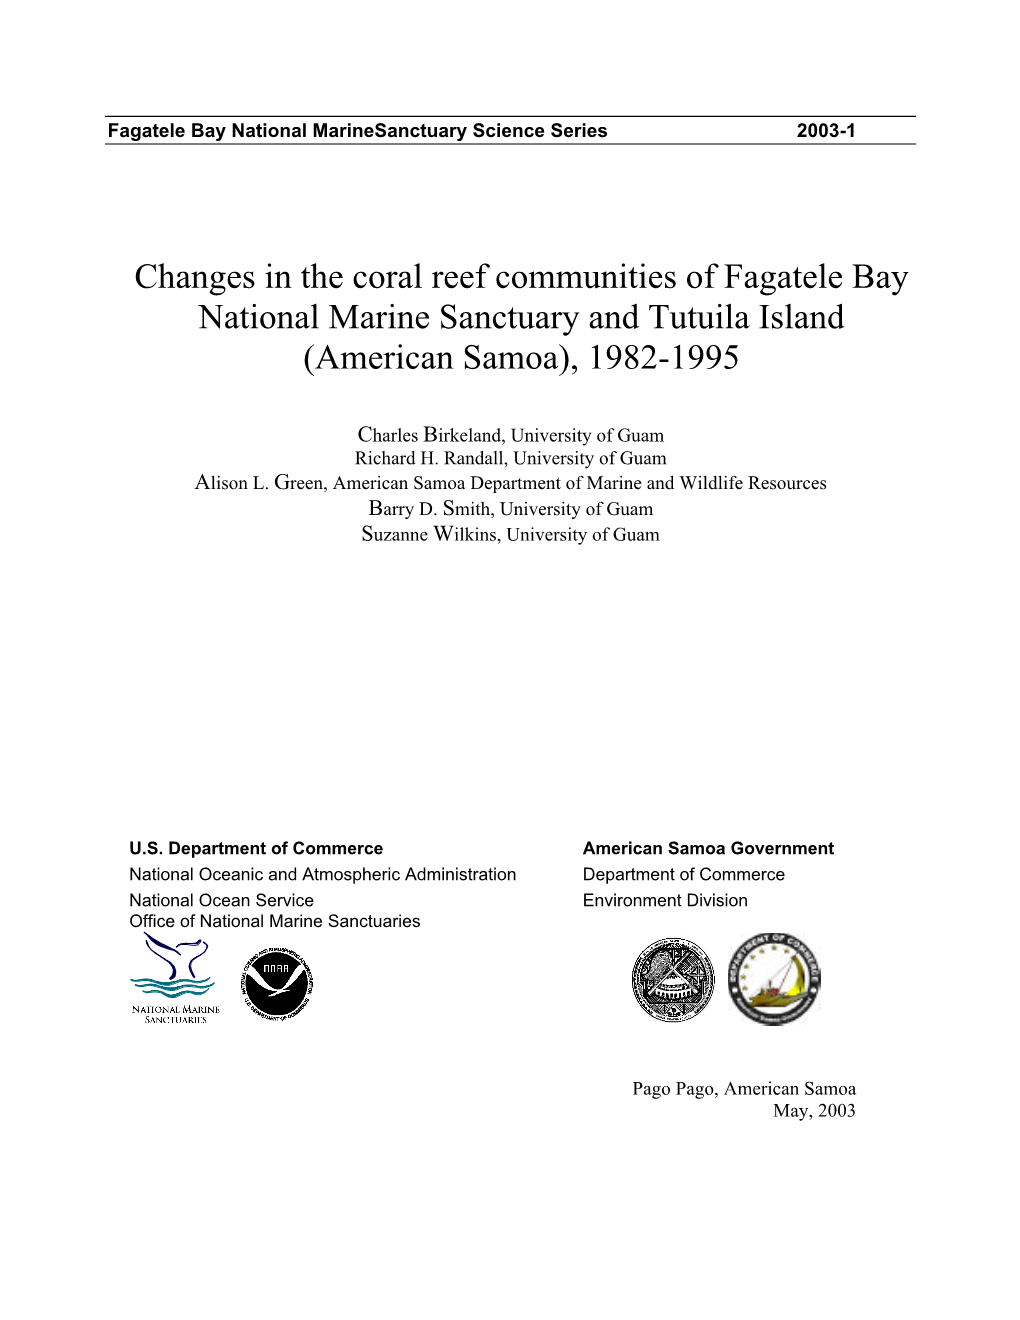 Changes in the Coral Reef Communities of Fagatele Bay National Marine Sanctuary and Tutuila Island (American Samoa), 1982-1995